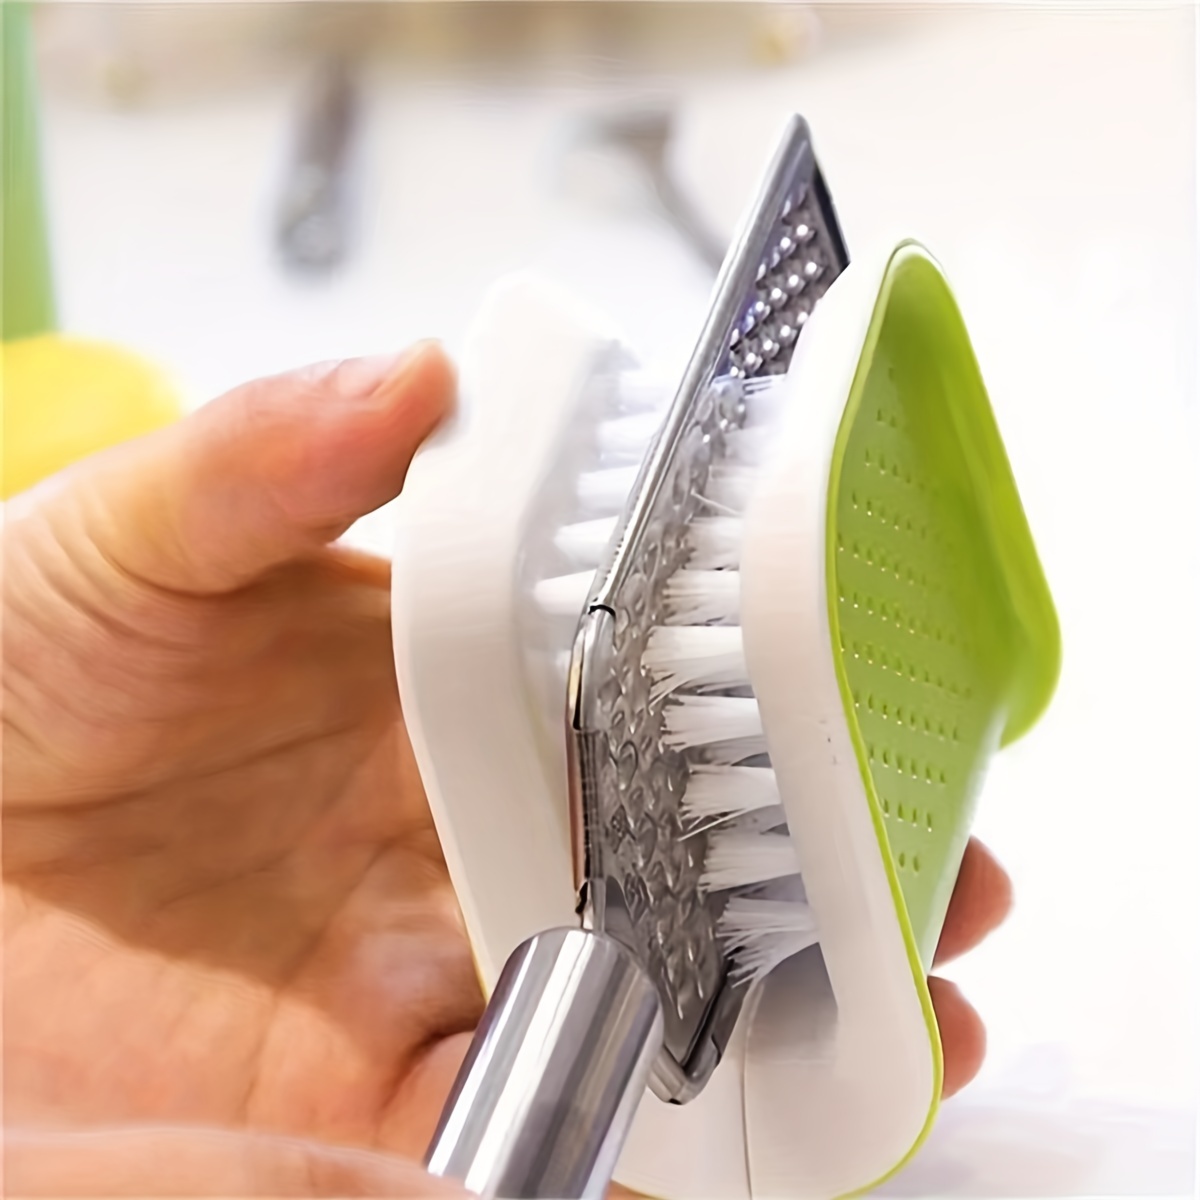 Dishware Cleaning Brush, Special Cleaning Brush For Washing Knives